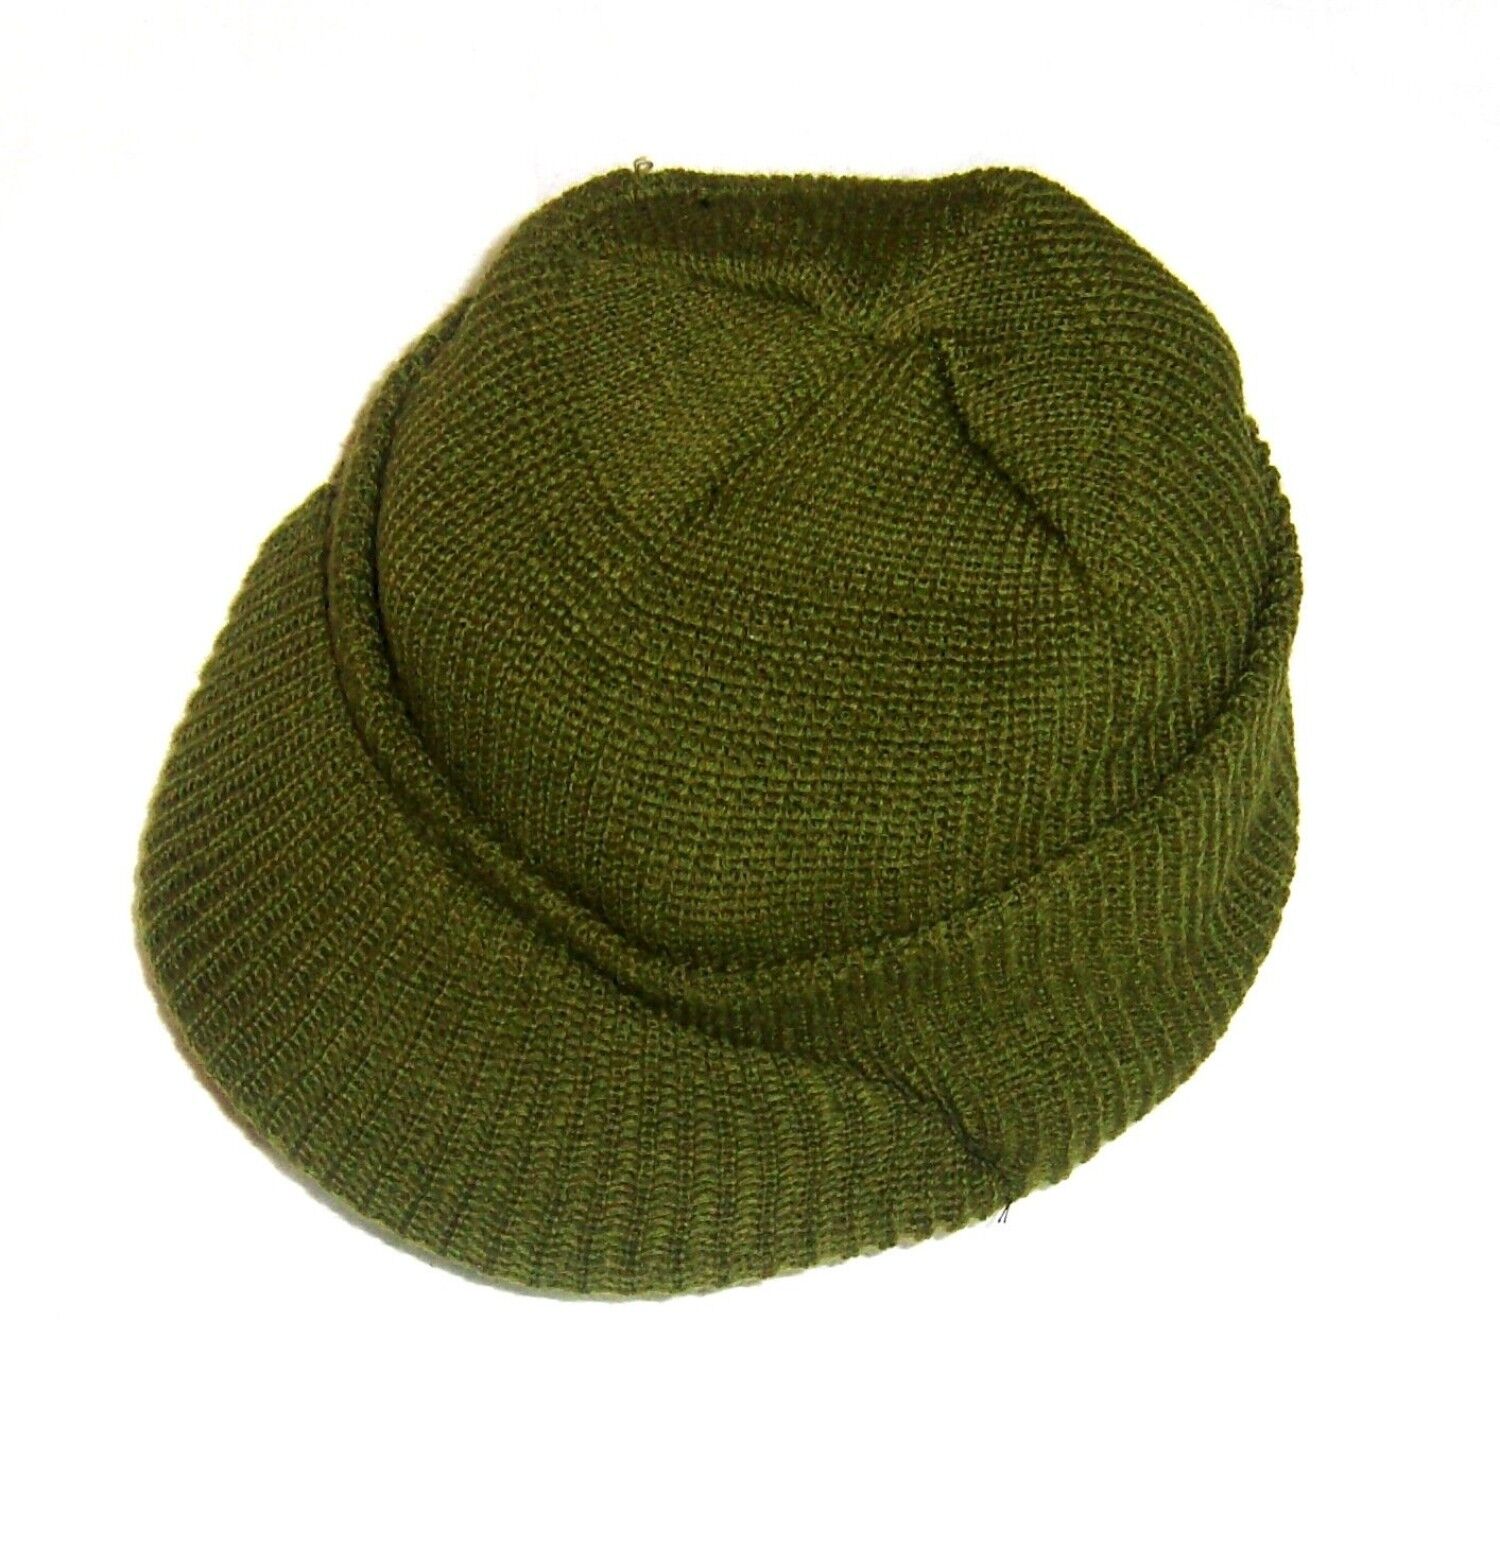 US Army Wool Military Jeep Cap Hat